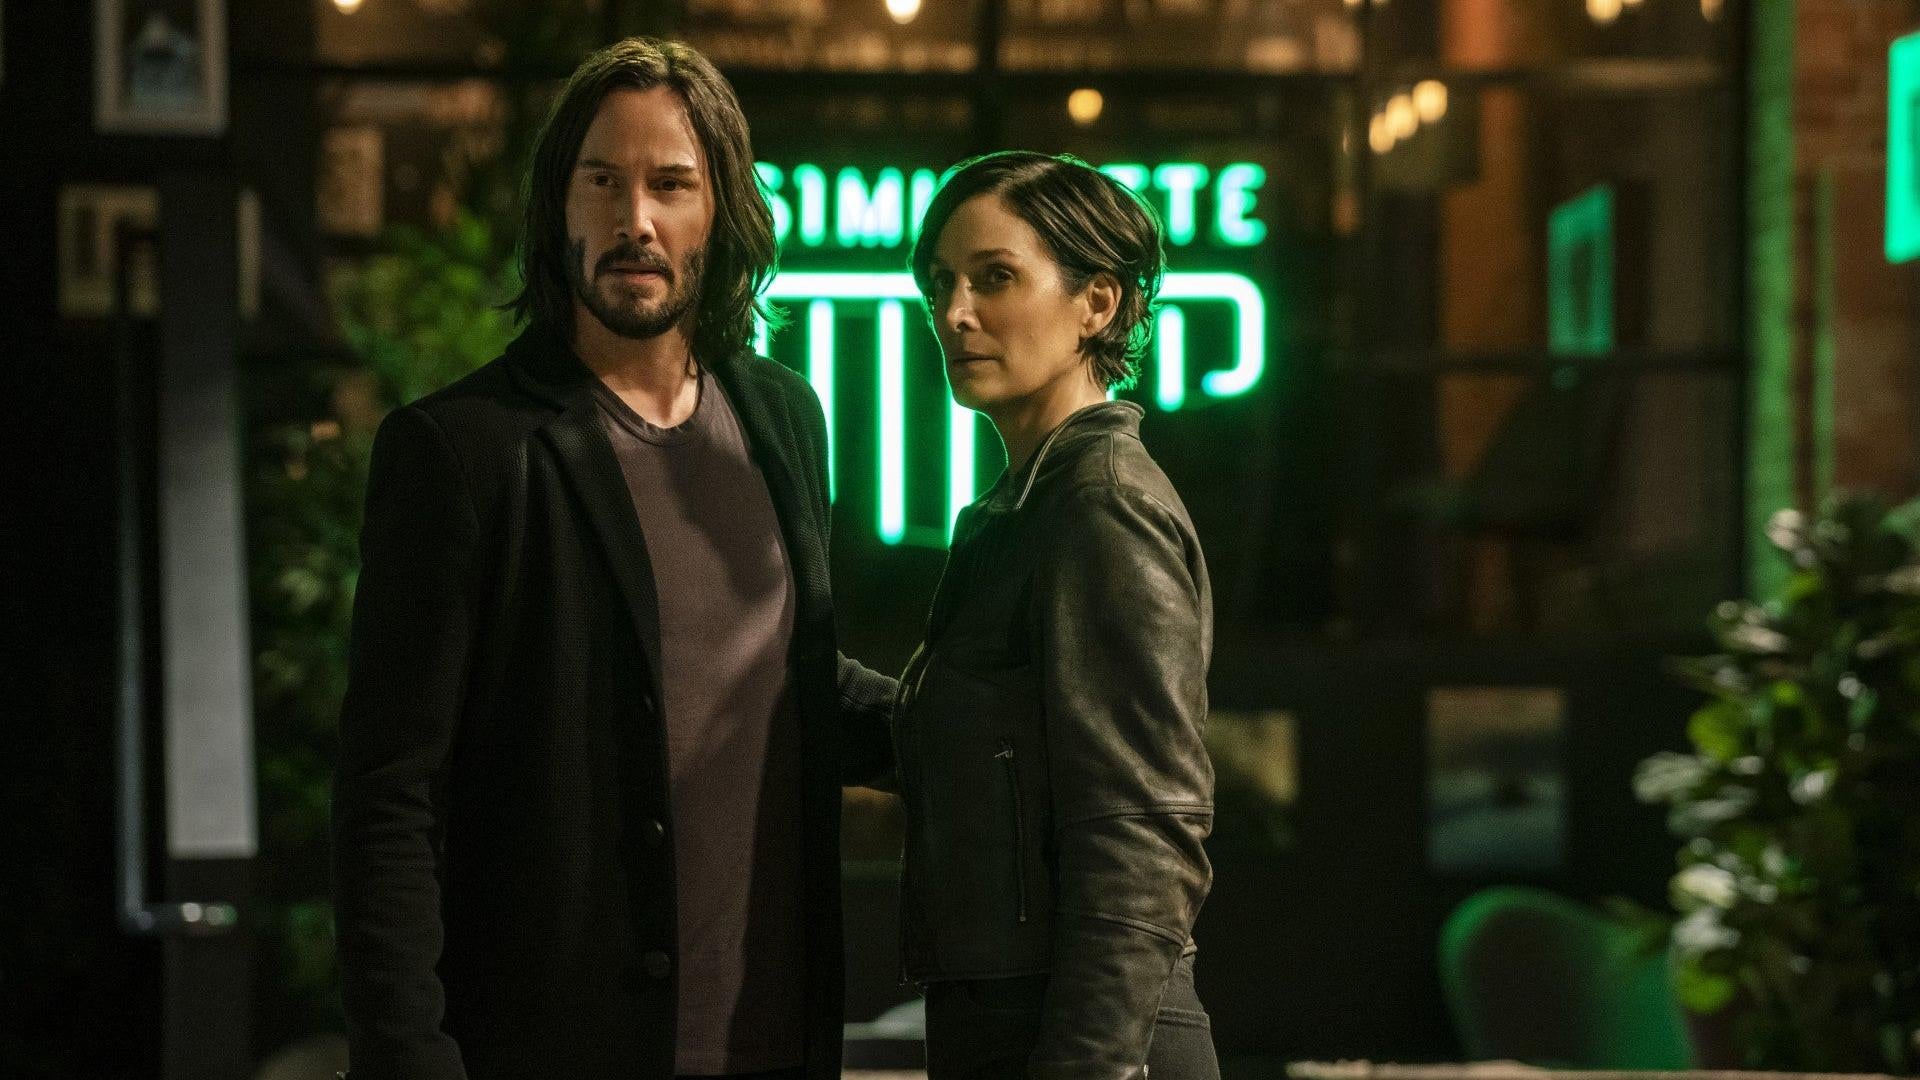 Neo and Trinity, now older, begin to put together the pieces. (Image: Warner Bros.)